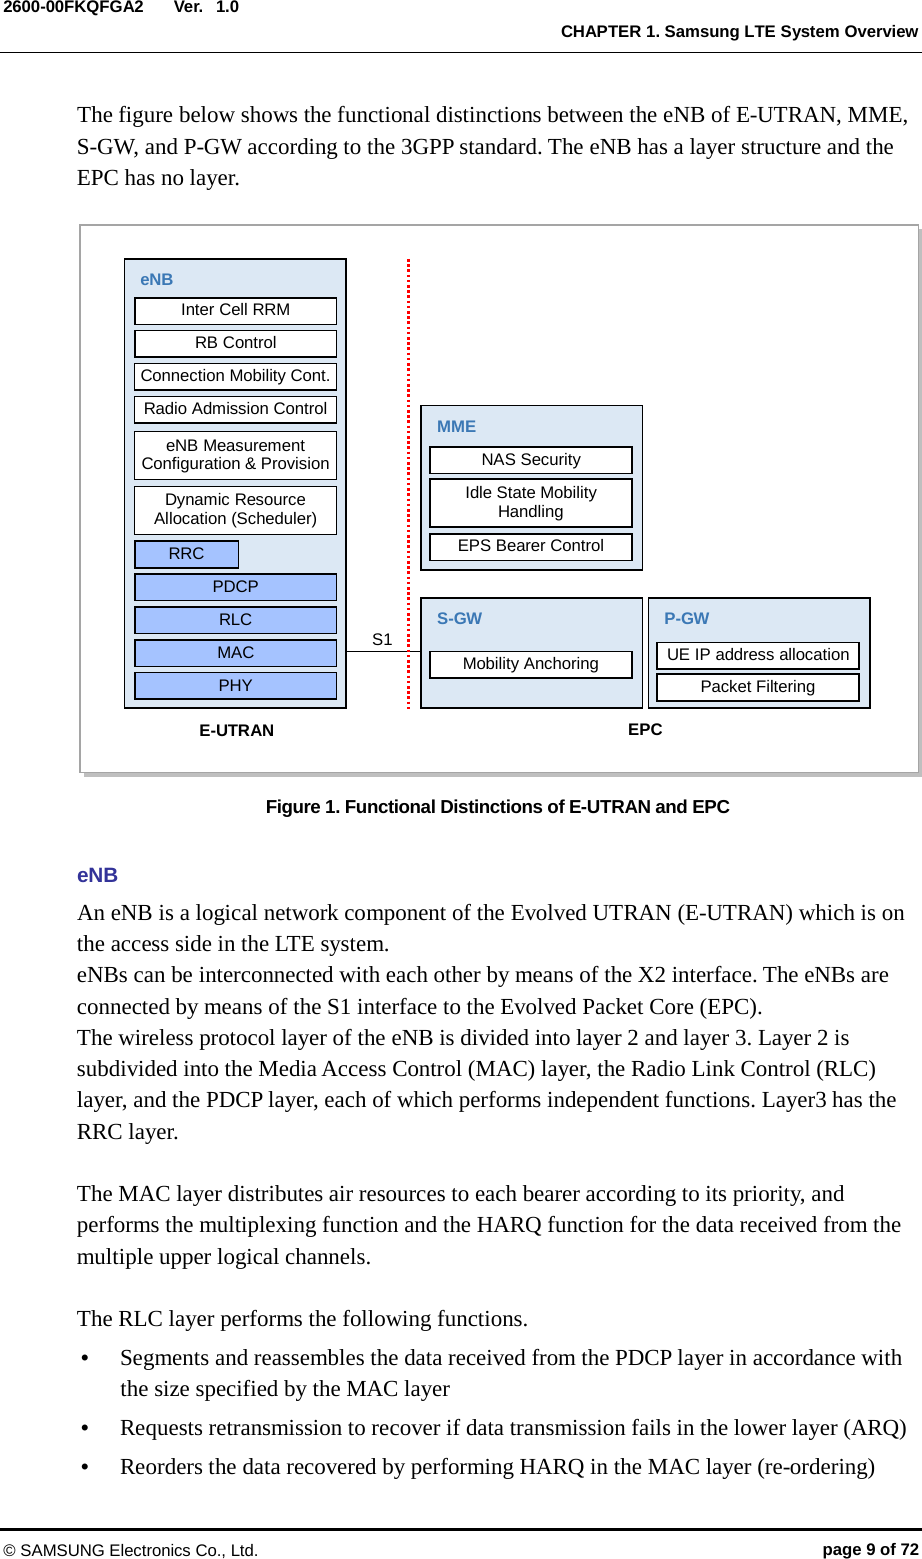  Ver.  CHAPTER 1. Samsung LTE System Overview 2600-00FKQFGA2 1.0 The figure below shows the functional distinctions between the eNB of E-UTRAN, MME, S-GW, and P-GW according to the 3GPP standard. The eNB has a layer structure and the EPC has no layer. Figure 1. Functional Distinctions of E-UTRAN and EPC eNB An eNB is a logical network component of the Evolved UTRAN (E-UTRAN) which is on the access side in the LTE system.   eNBs can be interconnected with each other by means of the X2 interface. The eNBs are connected by means of the S1 interface to the Evolved Packet Core (EPC). The wireless protocol layer of the eNB is divided into layer 2 and layer 3. Layer 2 is subdivided into the Media Access Control (MAC) layer, the Radio Link Control (RLC) layer, and the PDCP layer, each of which performs independent functions. Layer3 has the RRC layer. The MAC layer distributes air resources to each bearer according to its priority, and performs the multiplexing function and the HARQ function for the data received from the multiple upper logical channels. The RLC layer performs the following functions.  Segments and reassembles the data received from the PDCP layer in accordance with the size specified by the MAC layer  Requests retransmission to recover if data transmission fails in the lower layer (ARQ)  Reorders the data recovered by performing HARQ in the MAC layer (re-ordering) S1 MME NAS Security Idle State Mobility Handling EPS Bearer Control S-GW Mobility Anchoring P-GW Packet Filtering UE IP address allocation EPC eNB Inter Cell RRM RB Control Connection Mobility Cont. Radio Admission Control eNB Measurement Configuration &amp; Provision Dynamic Resource Allocation (Scheduler) RRC PDCP RLC MAC PHY E-UTRAN © SAMSUNG Electronics Co., Ltd. page 9 of 72 